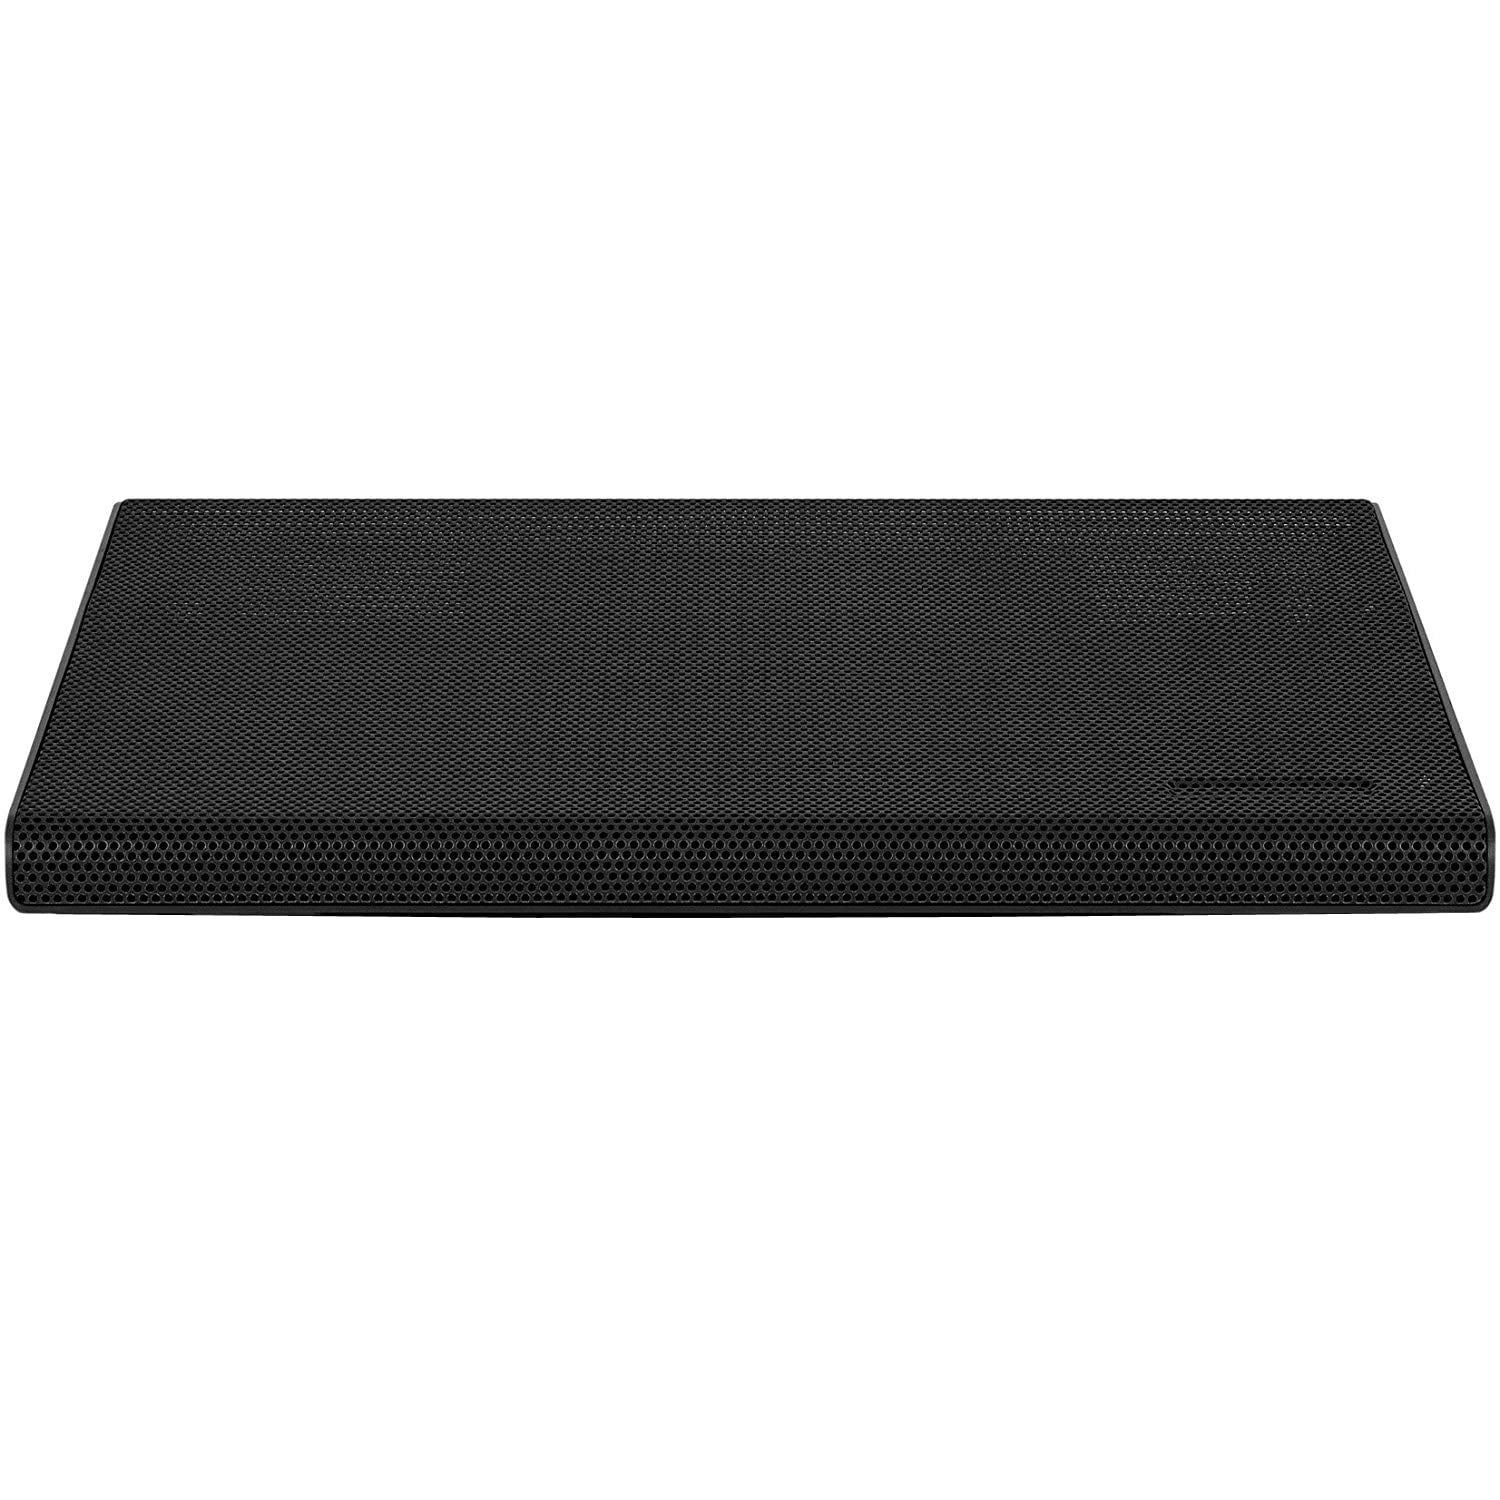 Onn Laptop Computer Cooling Pad 17" Ultra Slim with USB Cord 3-position Stand 